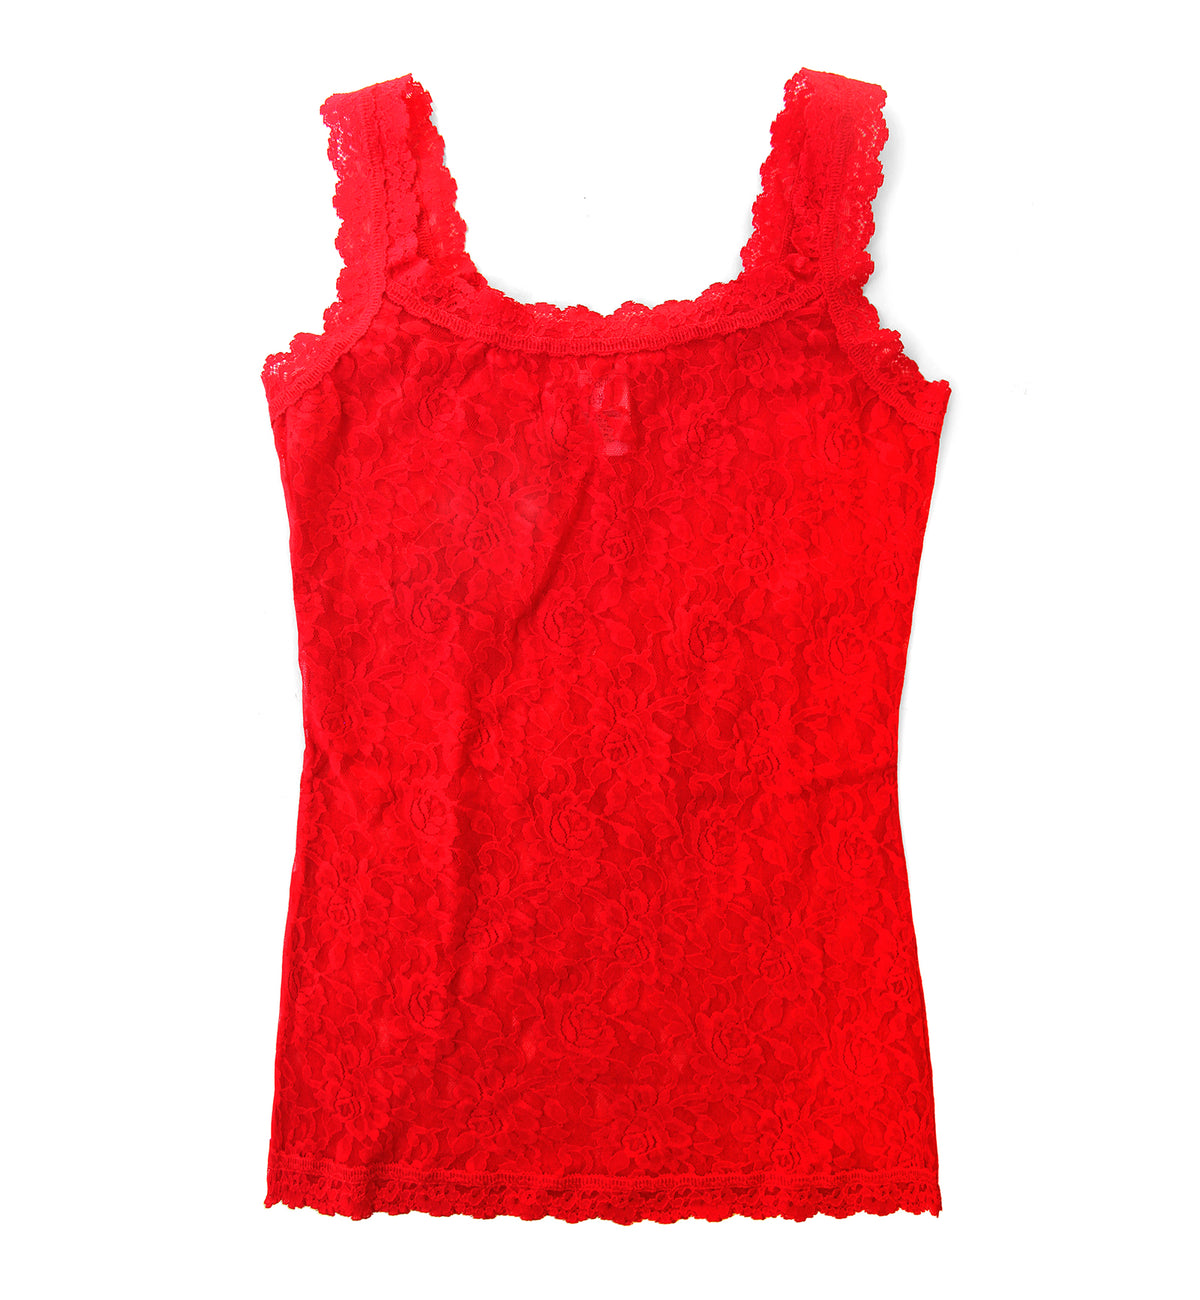 Hanky Panky Signature Lace Unlined Camisole (1390L),XS,Red - Red,XS